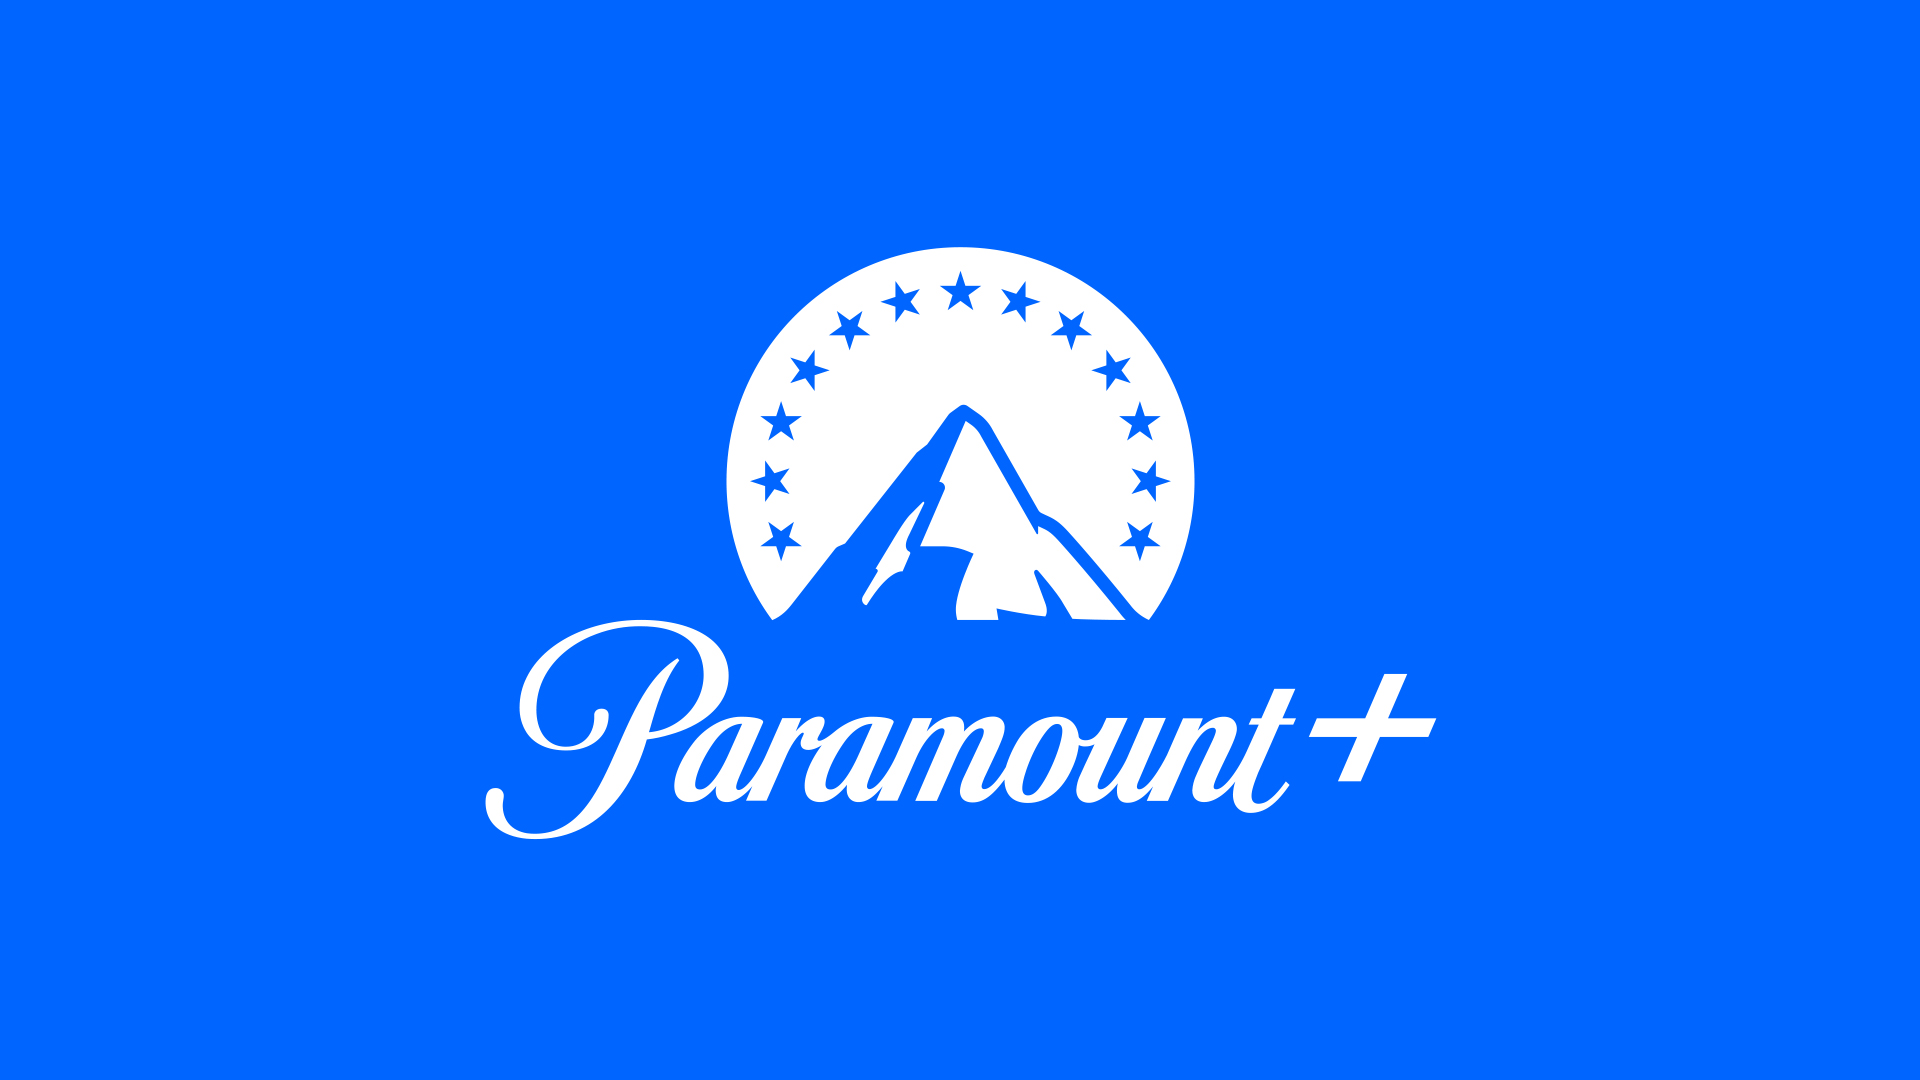 How to Get FREE Paramount+, Netflix, Apple TV+, & More From Services You Already Pay For